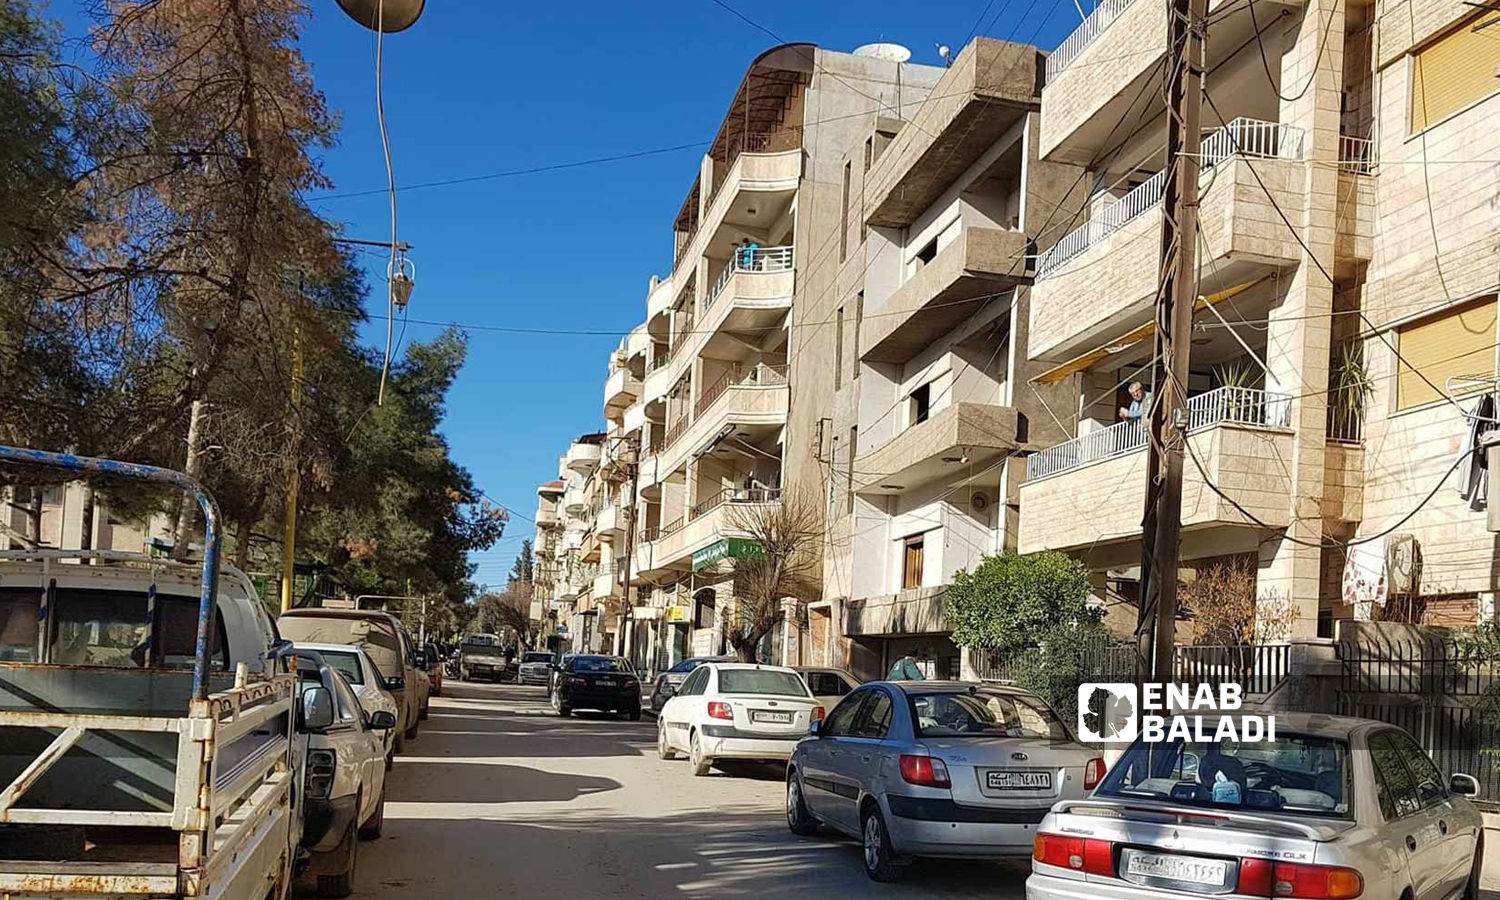 A neighborhood in the Qamishli city, the largest area of al-Hasakah governorate in northeast Syria - 30 January 2018 (Enab Baladi)